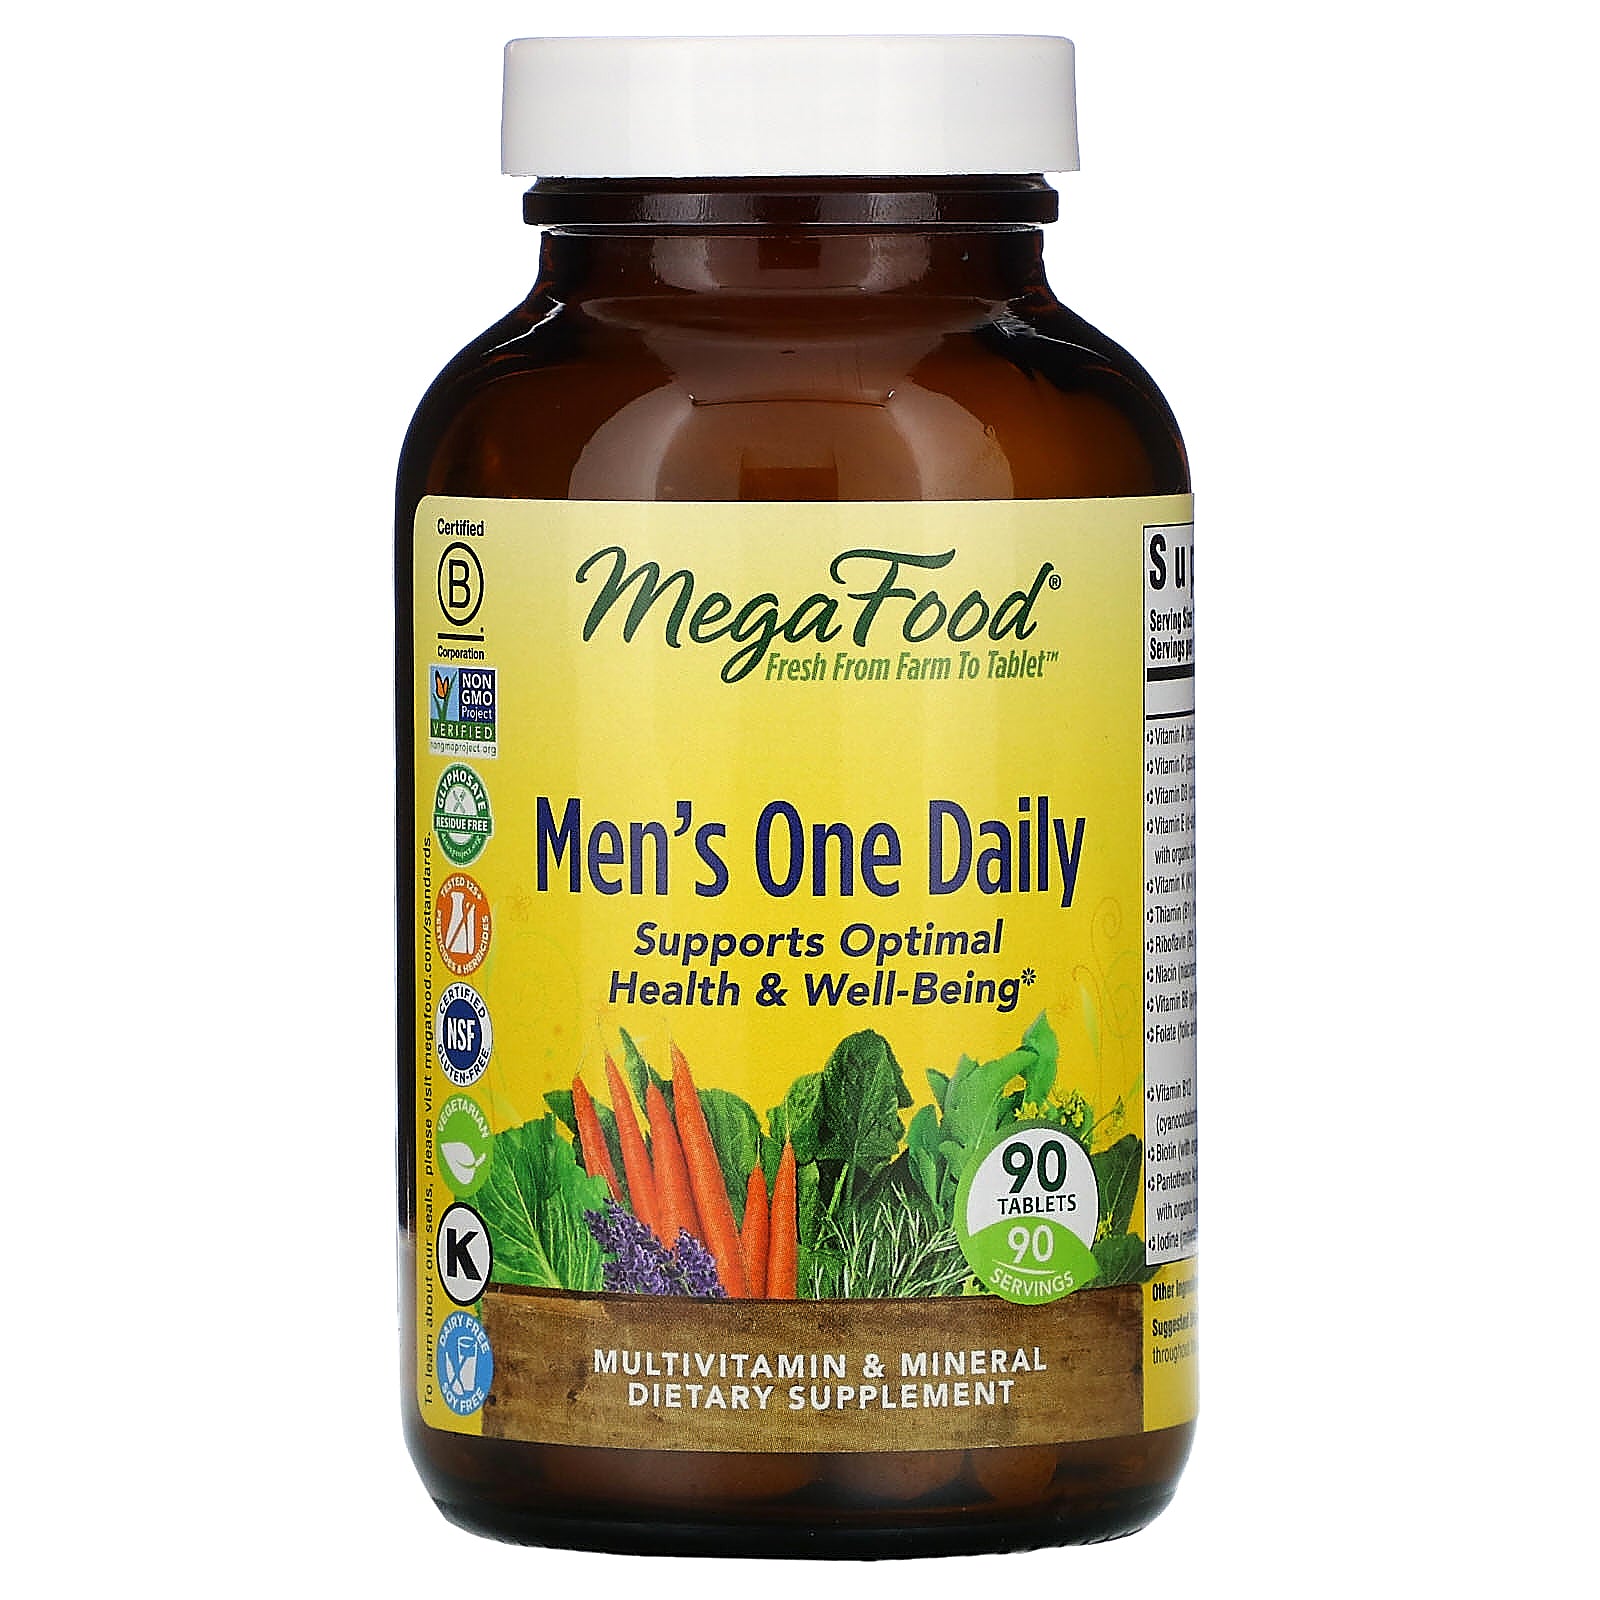 MegaFood, Men's One Daily, Iron Free, 90 Tablets